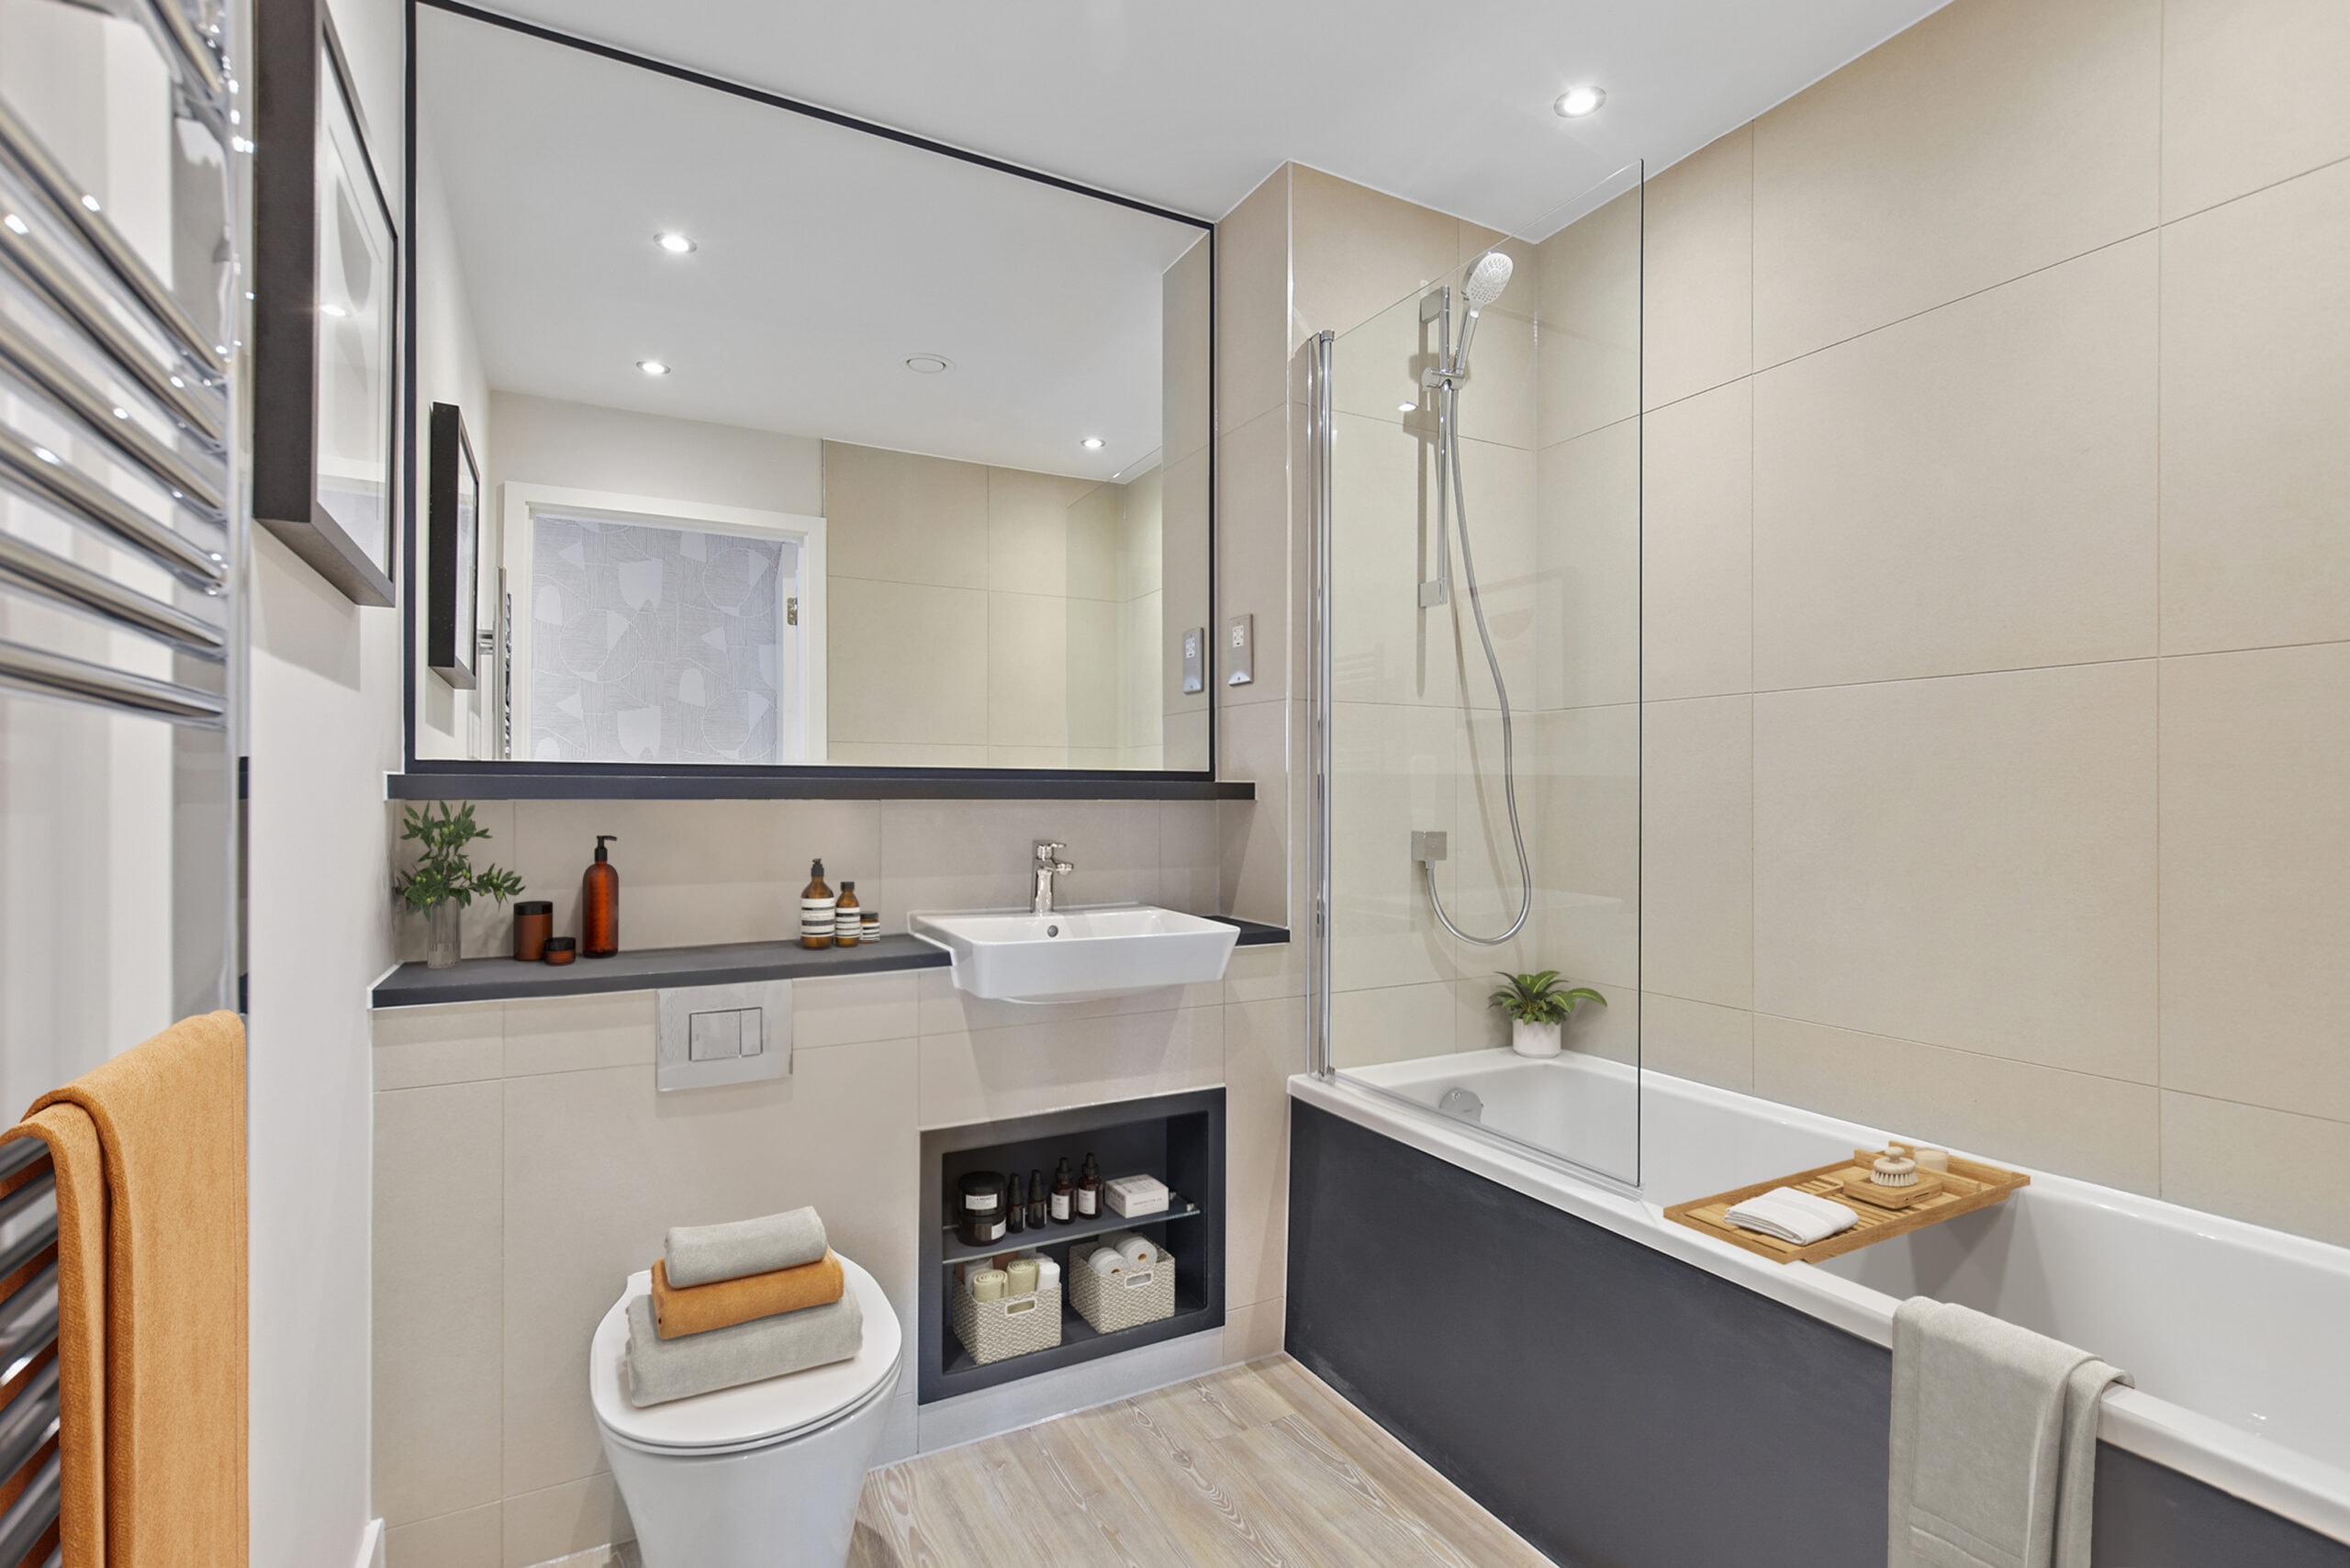 An interior image of a bathroom at the Lampton Parkside development by Notting Hill Genesis - available to buy through Shared Ownership on Share to Buy!